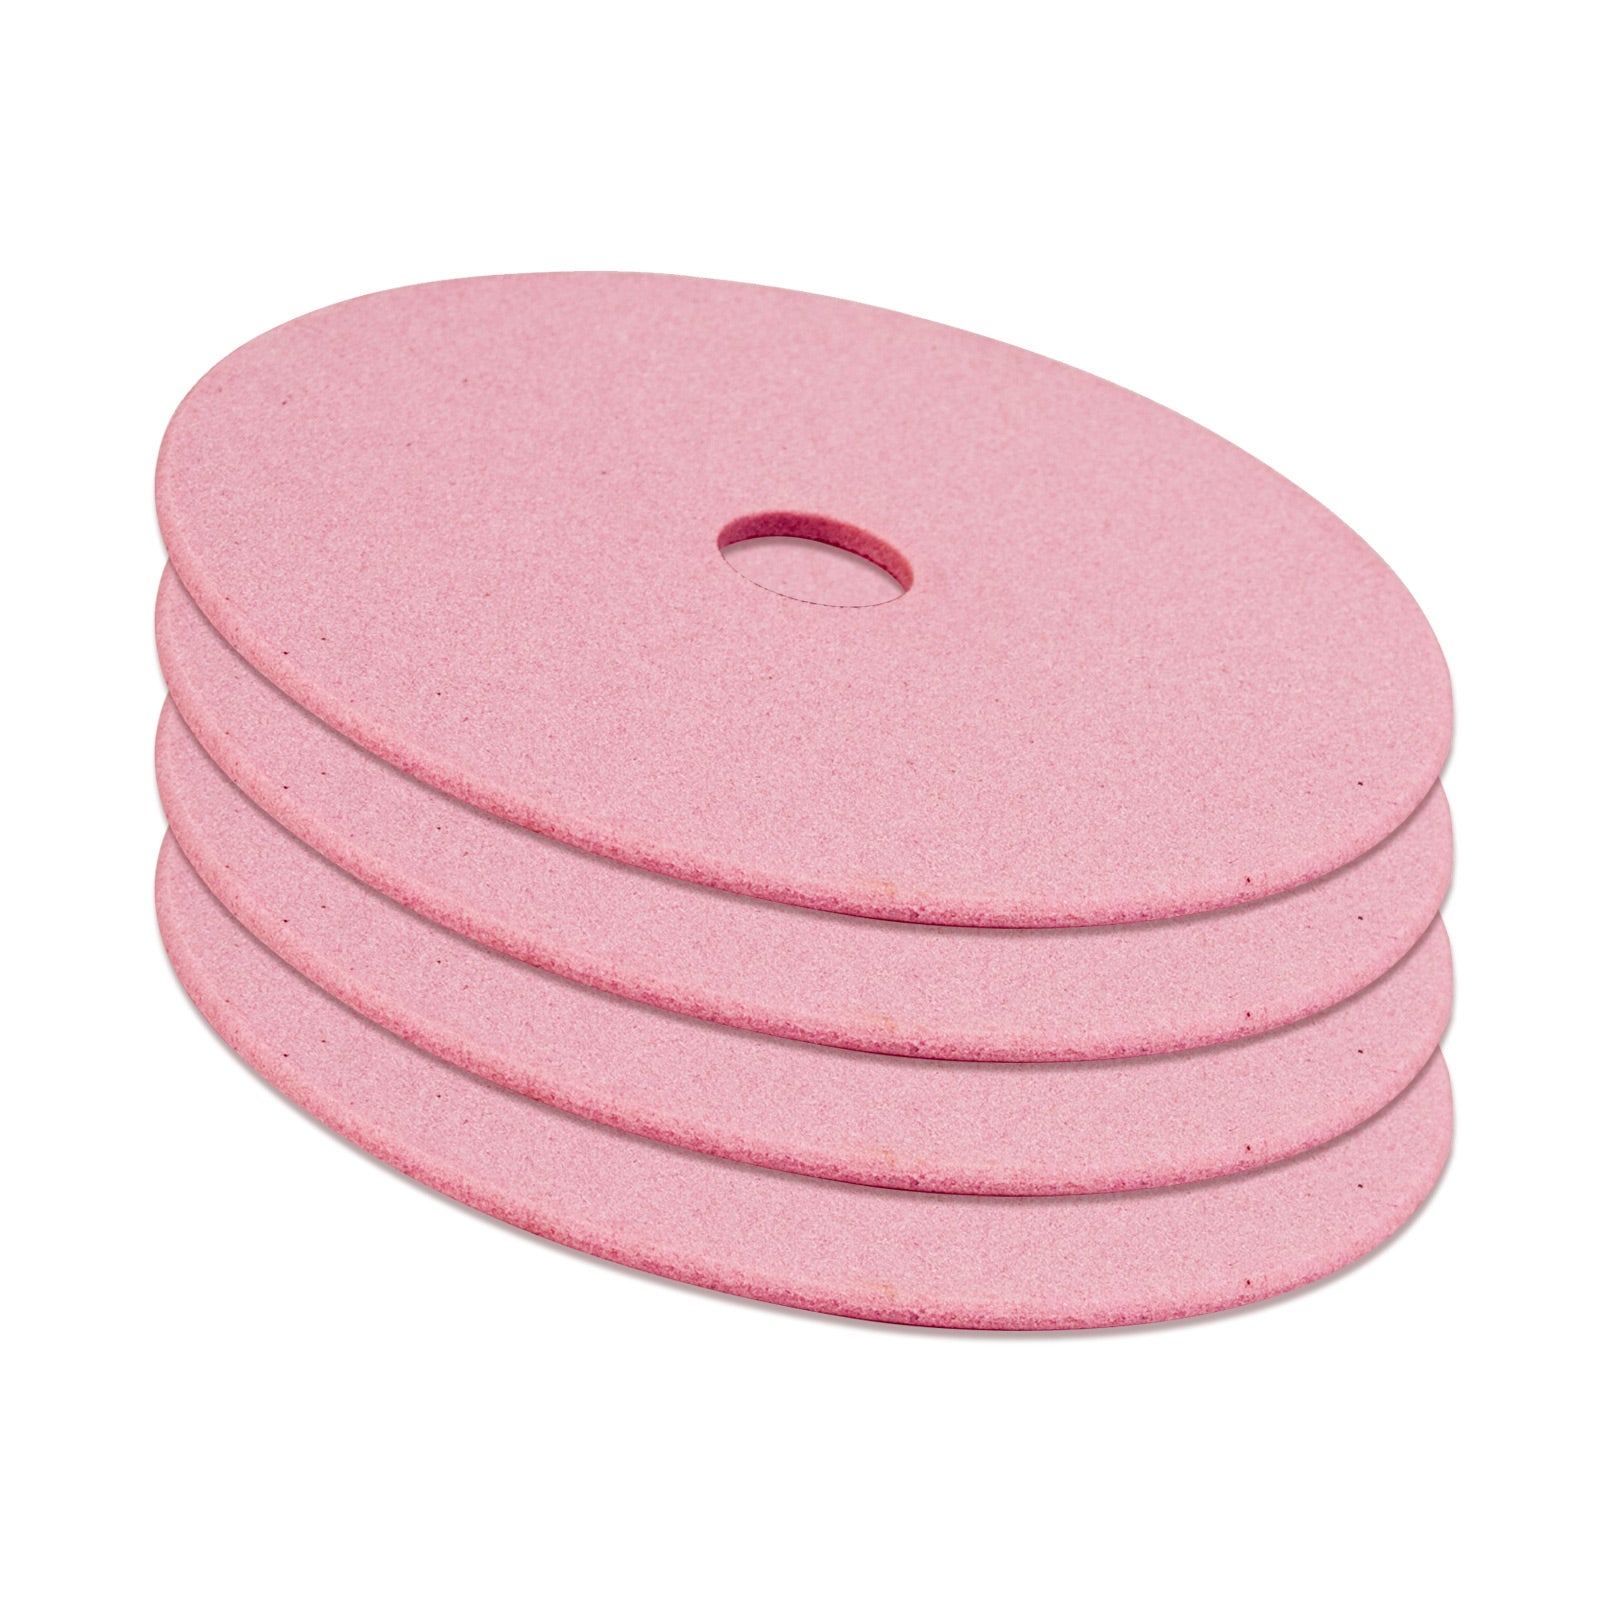 4X Grinding Disc for 350W Chainsaw Sharpener .325 145mm Thin - SILBERSHELL